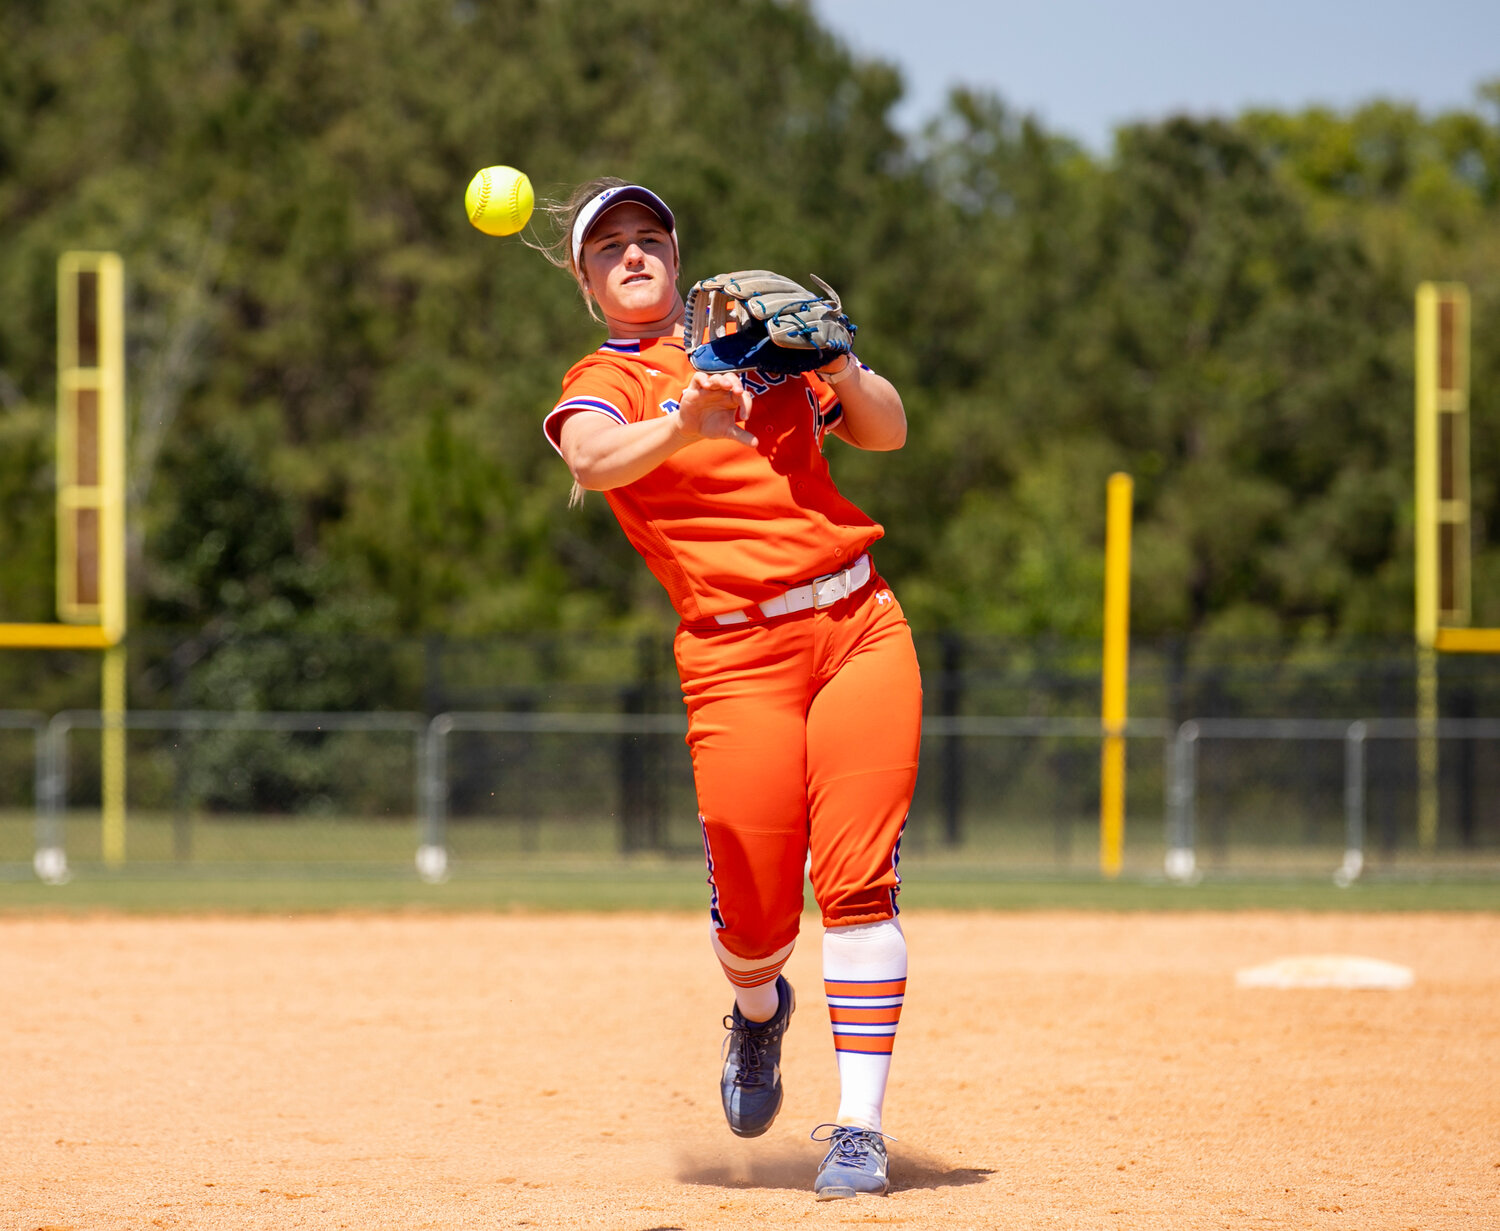 Ava Hodo is already in her third season for the Orange Beach Makos but is up for a national freshman of the year competition held by Scorebook Live this week. At the same time, Orange Beach will be searching for its third straight state title in Oxford.